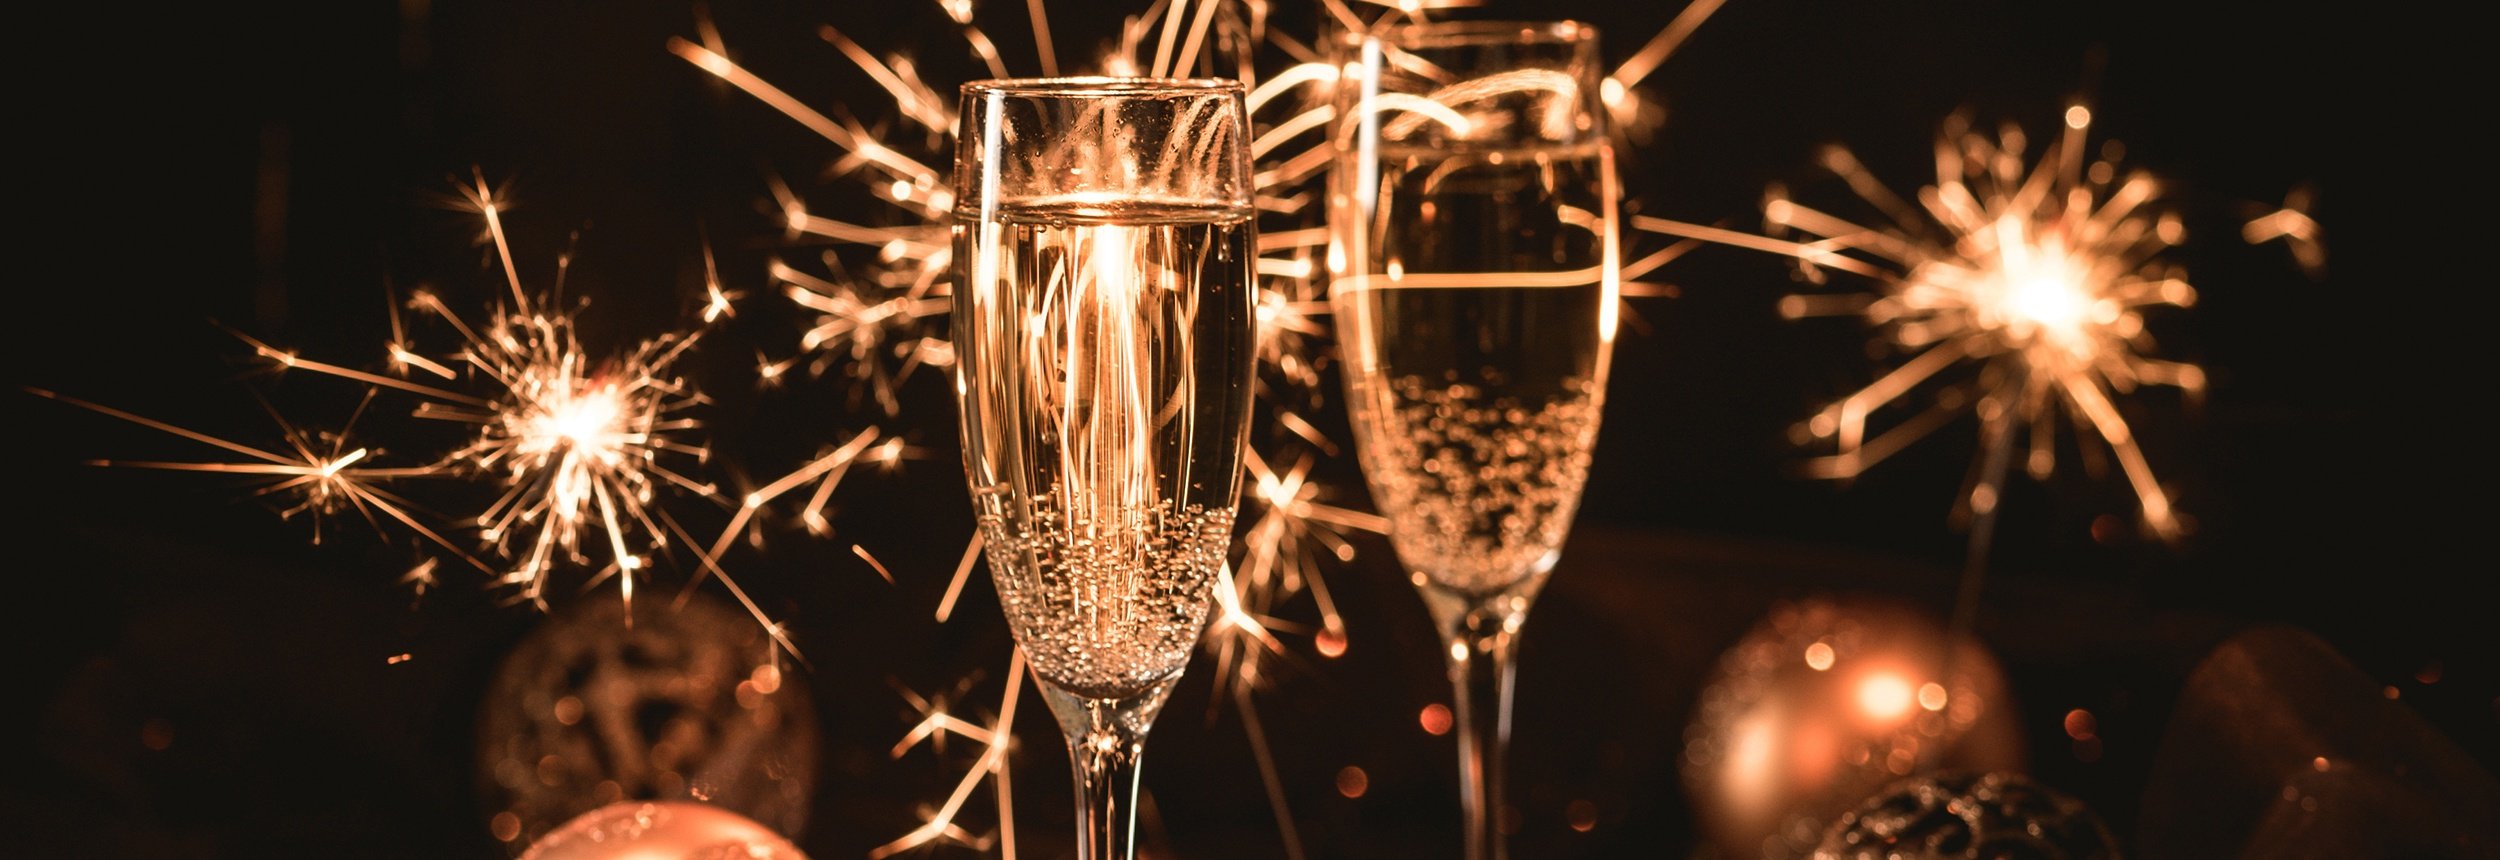 Celebrations Are Incomplete Without Champagnes, Here Are 5 to Try